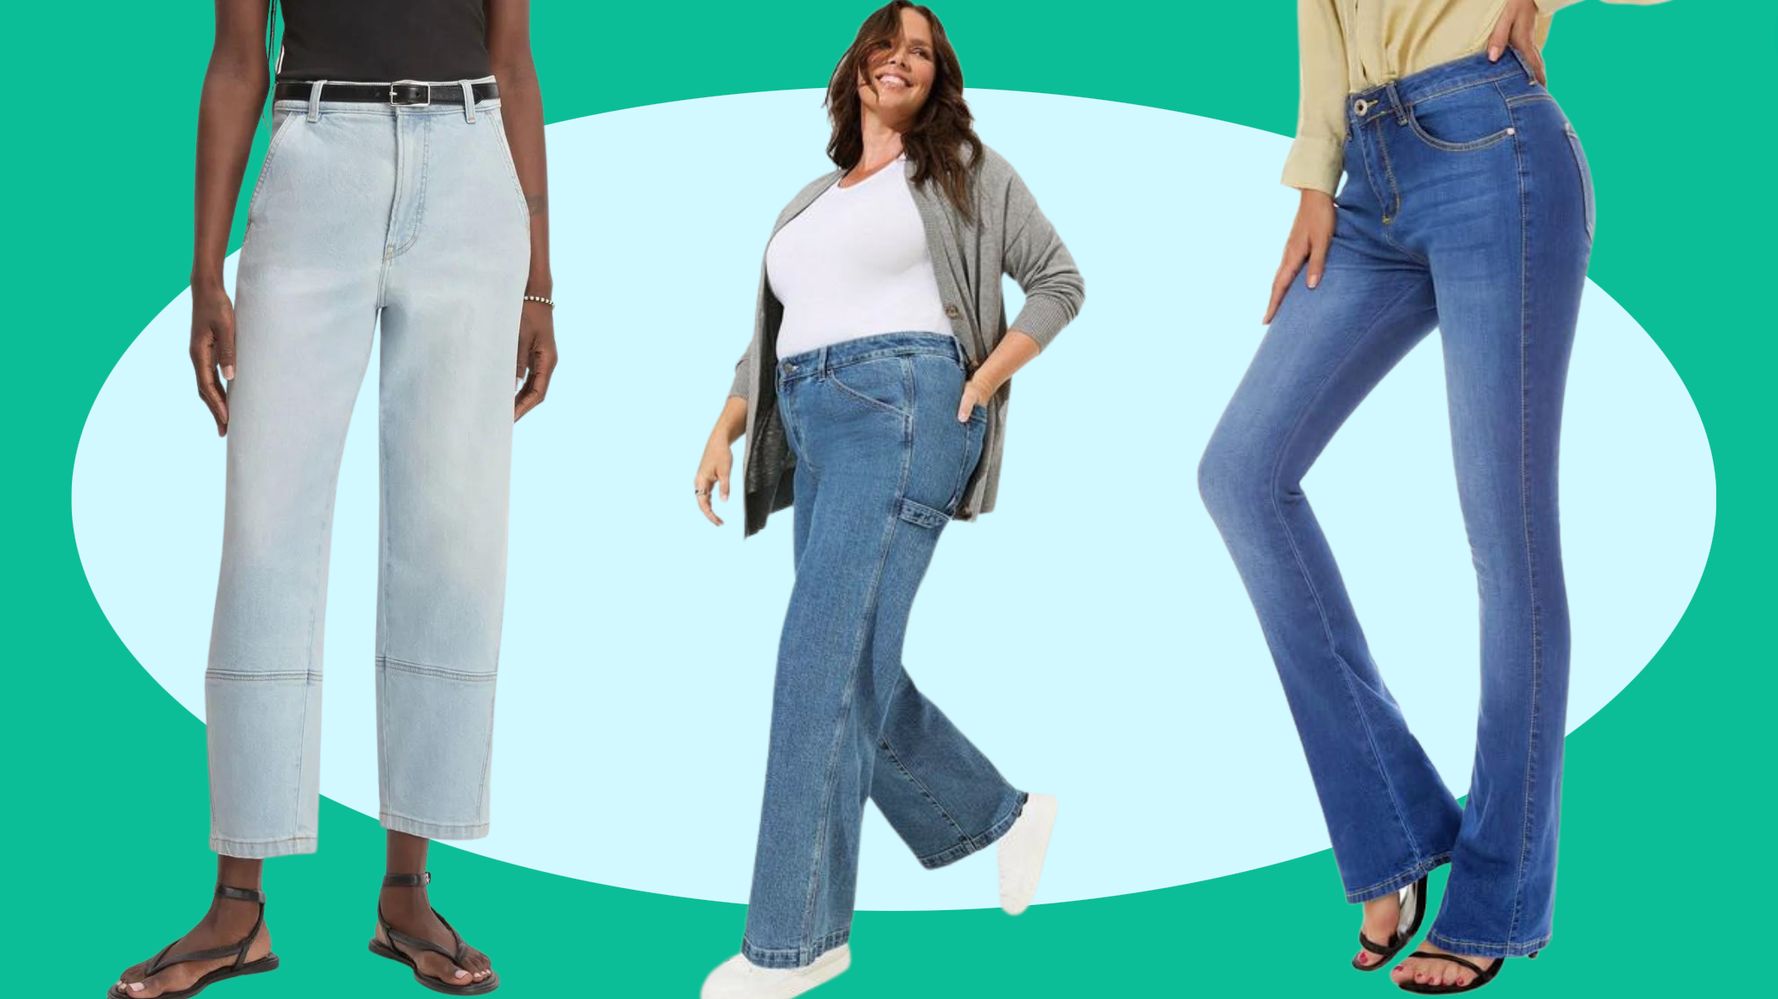 These high rise jeggings from Gap are the perfect pair of jeans